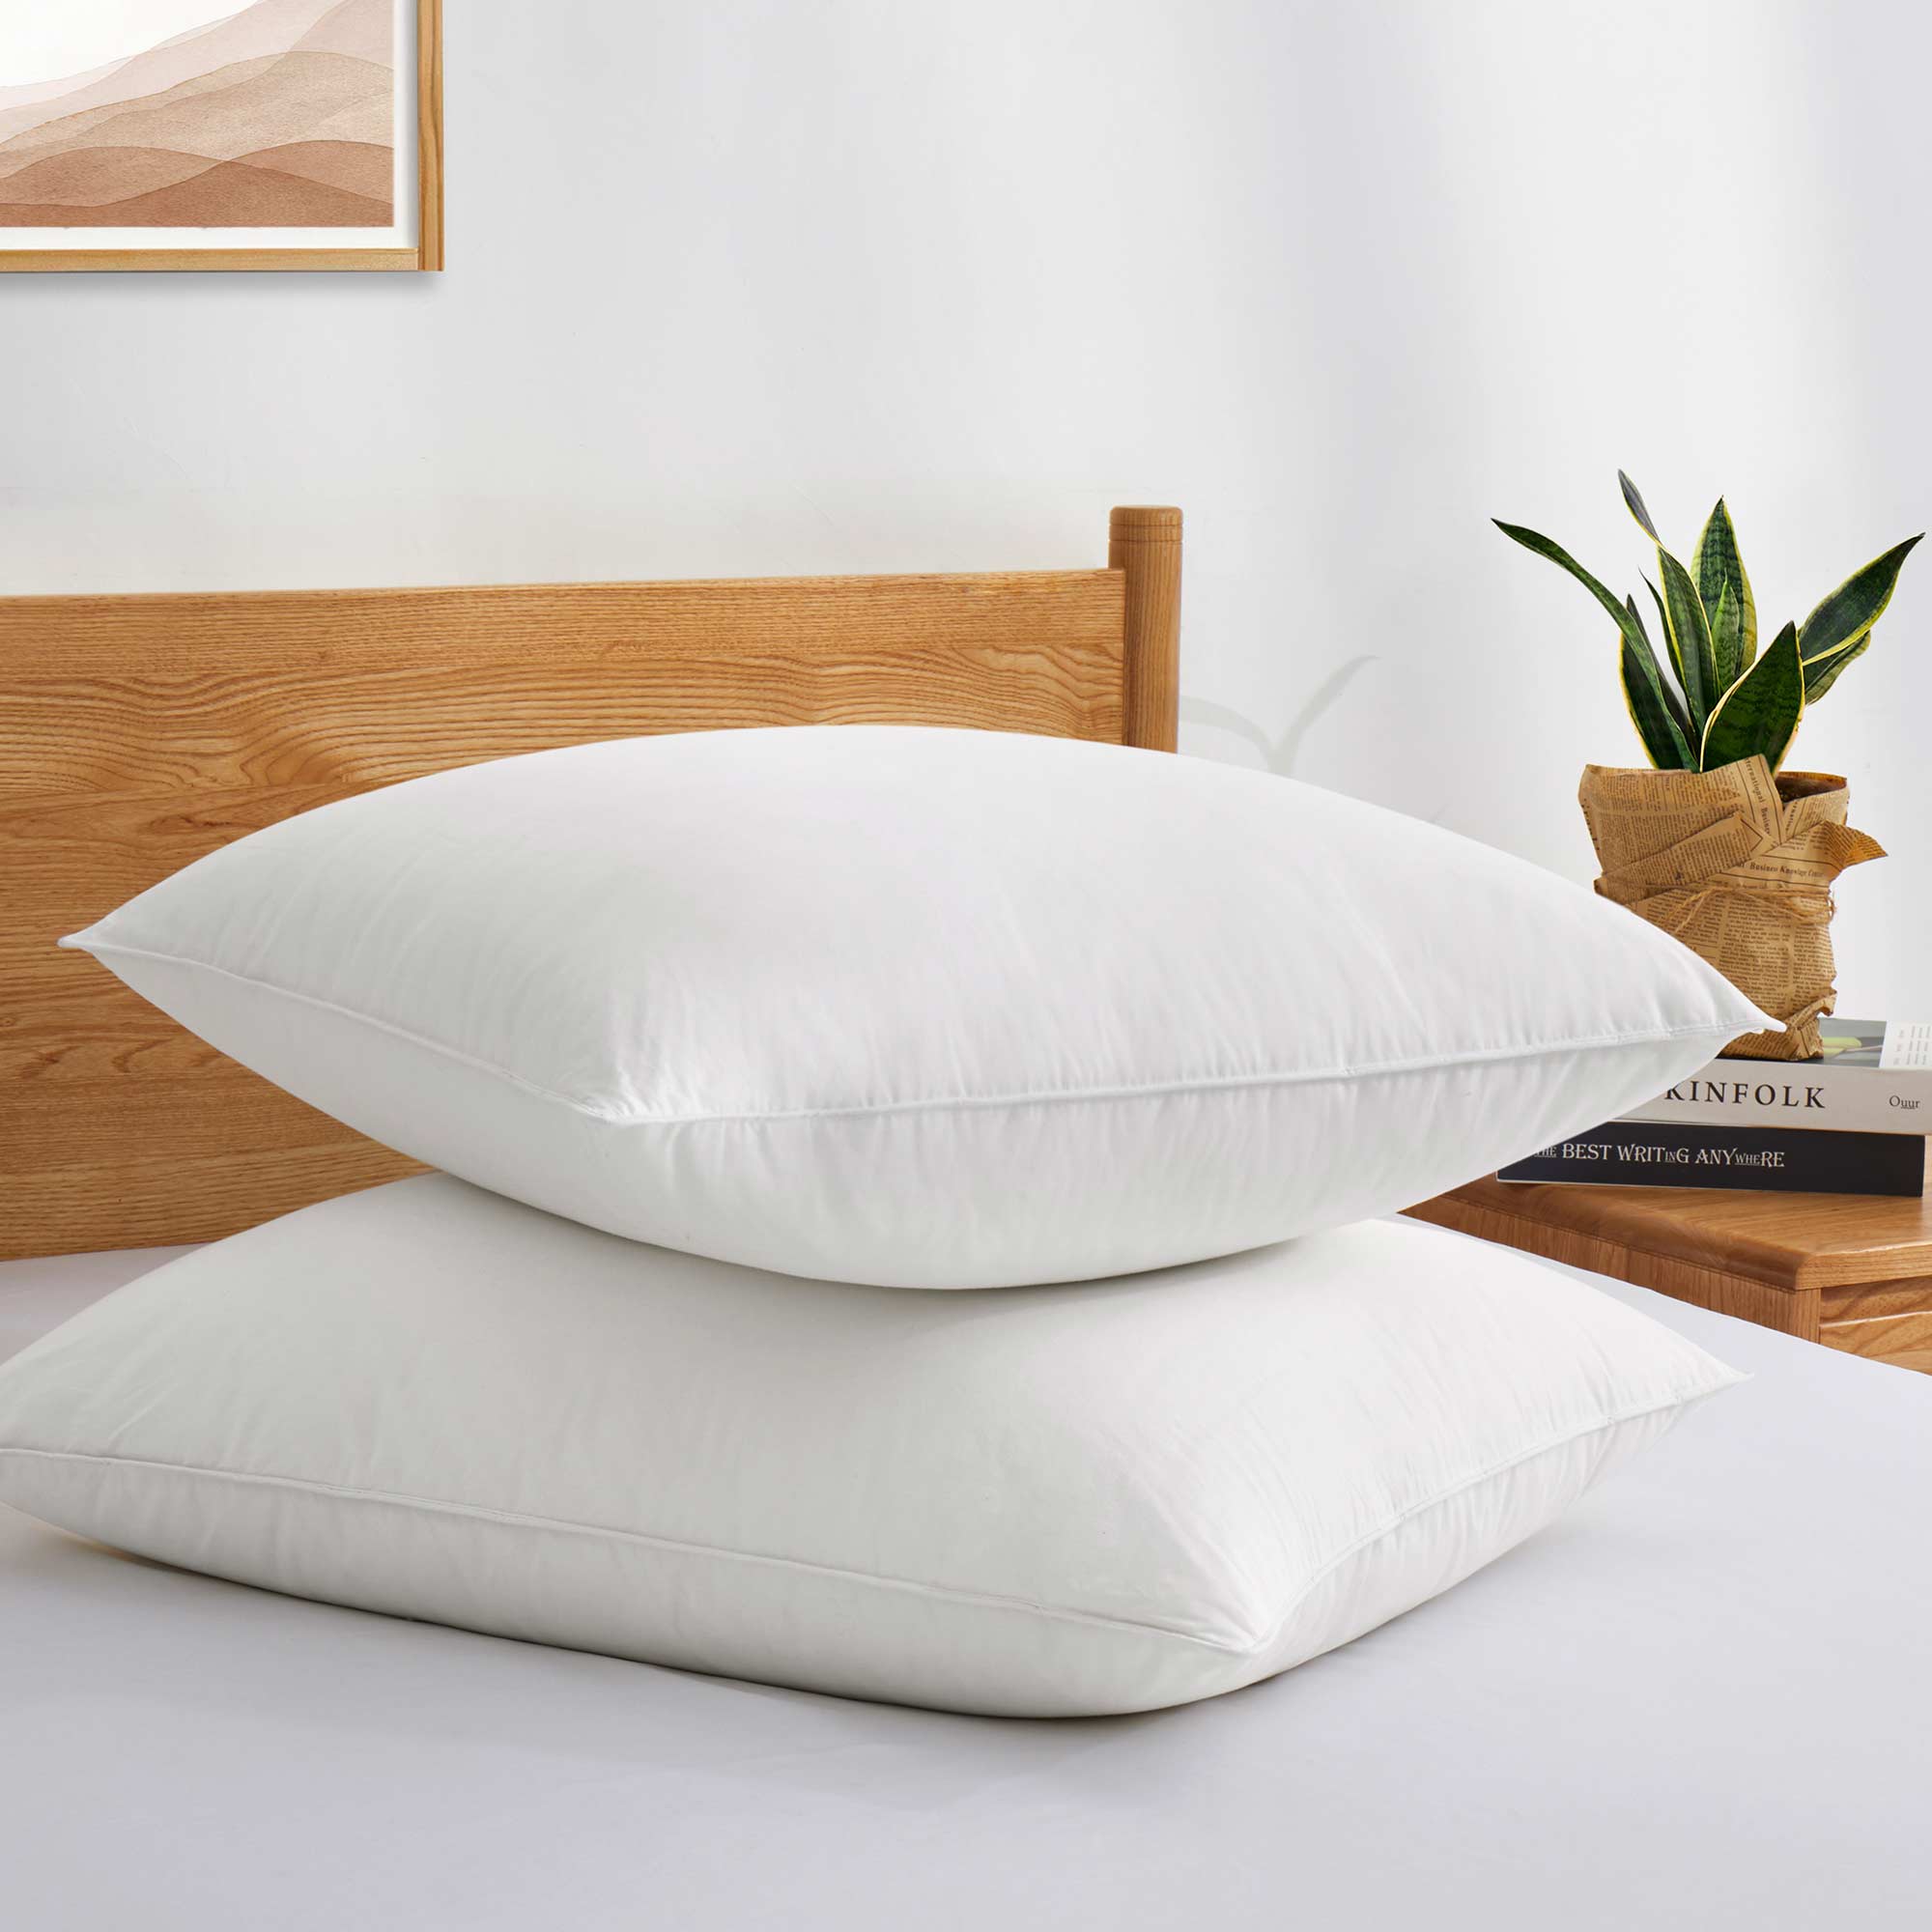 Pack of 2 White Feather Down 4-Layer Bed Pillows for Side & Back